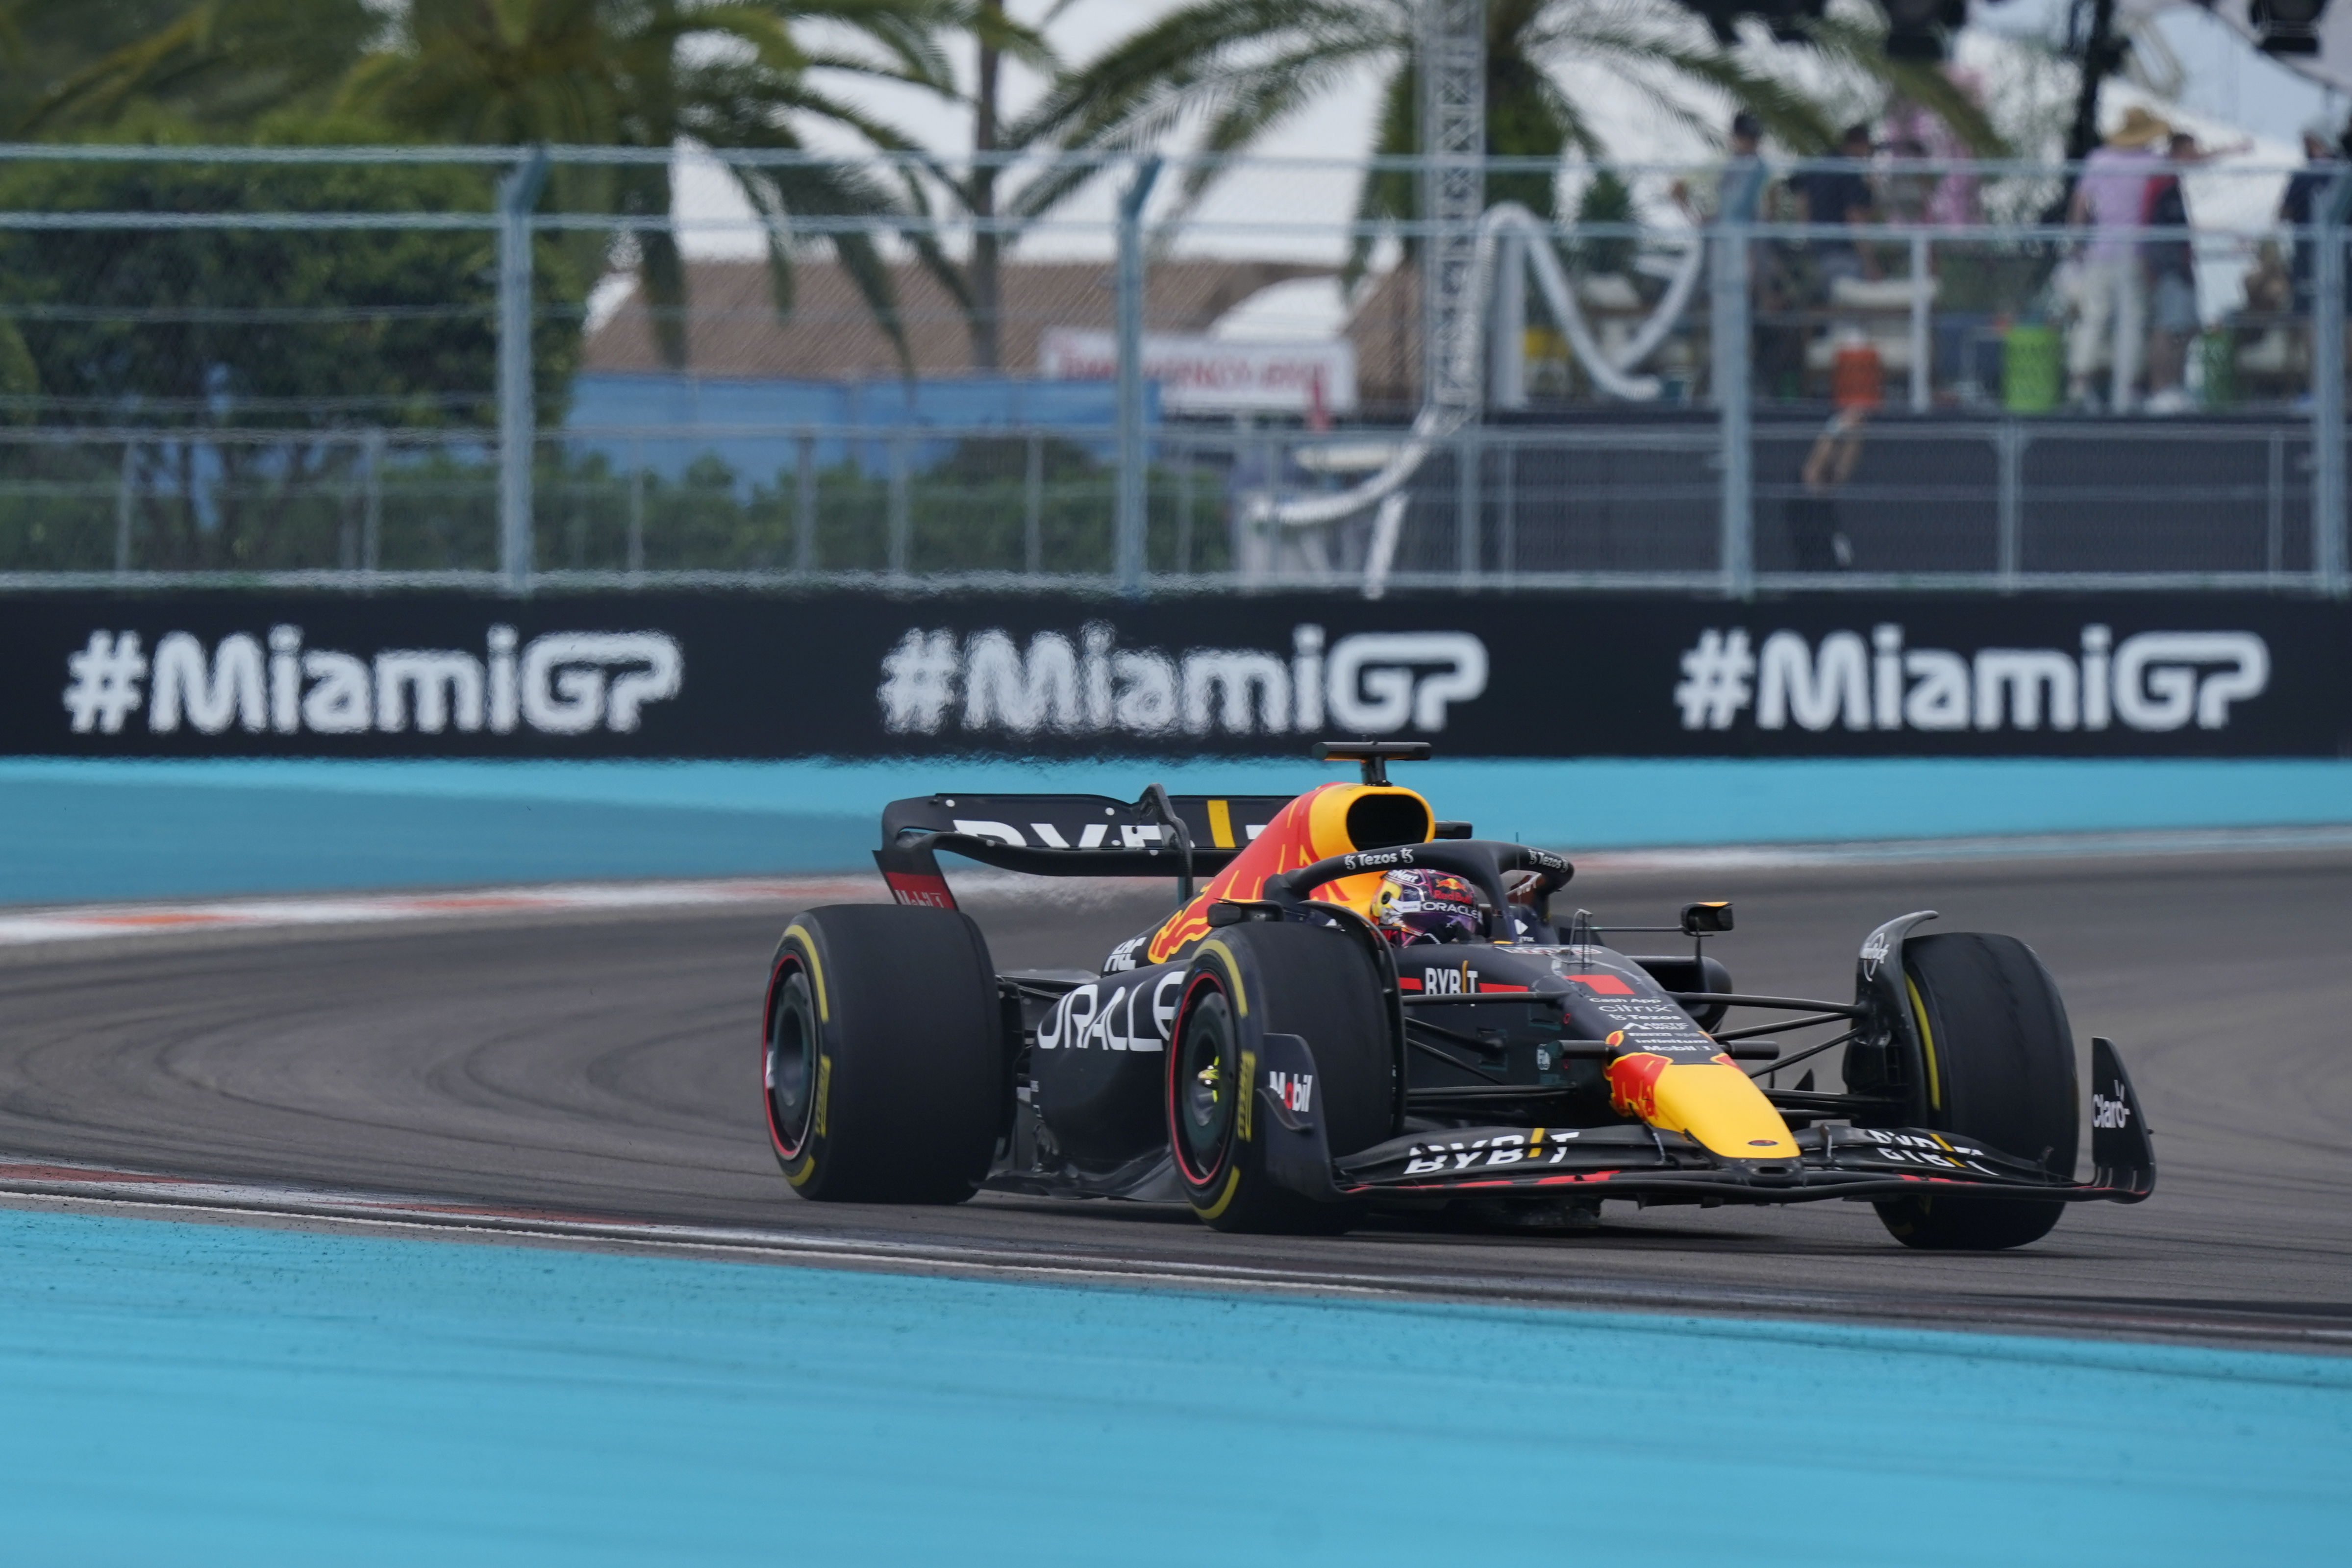 Miami GP Free live stream, start time, TV, how to watch F1 race